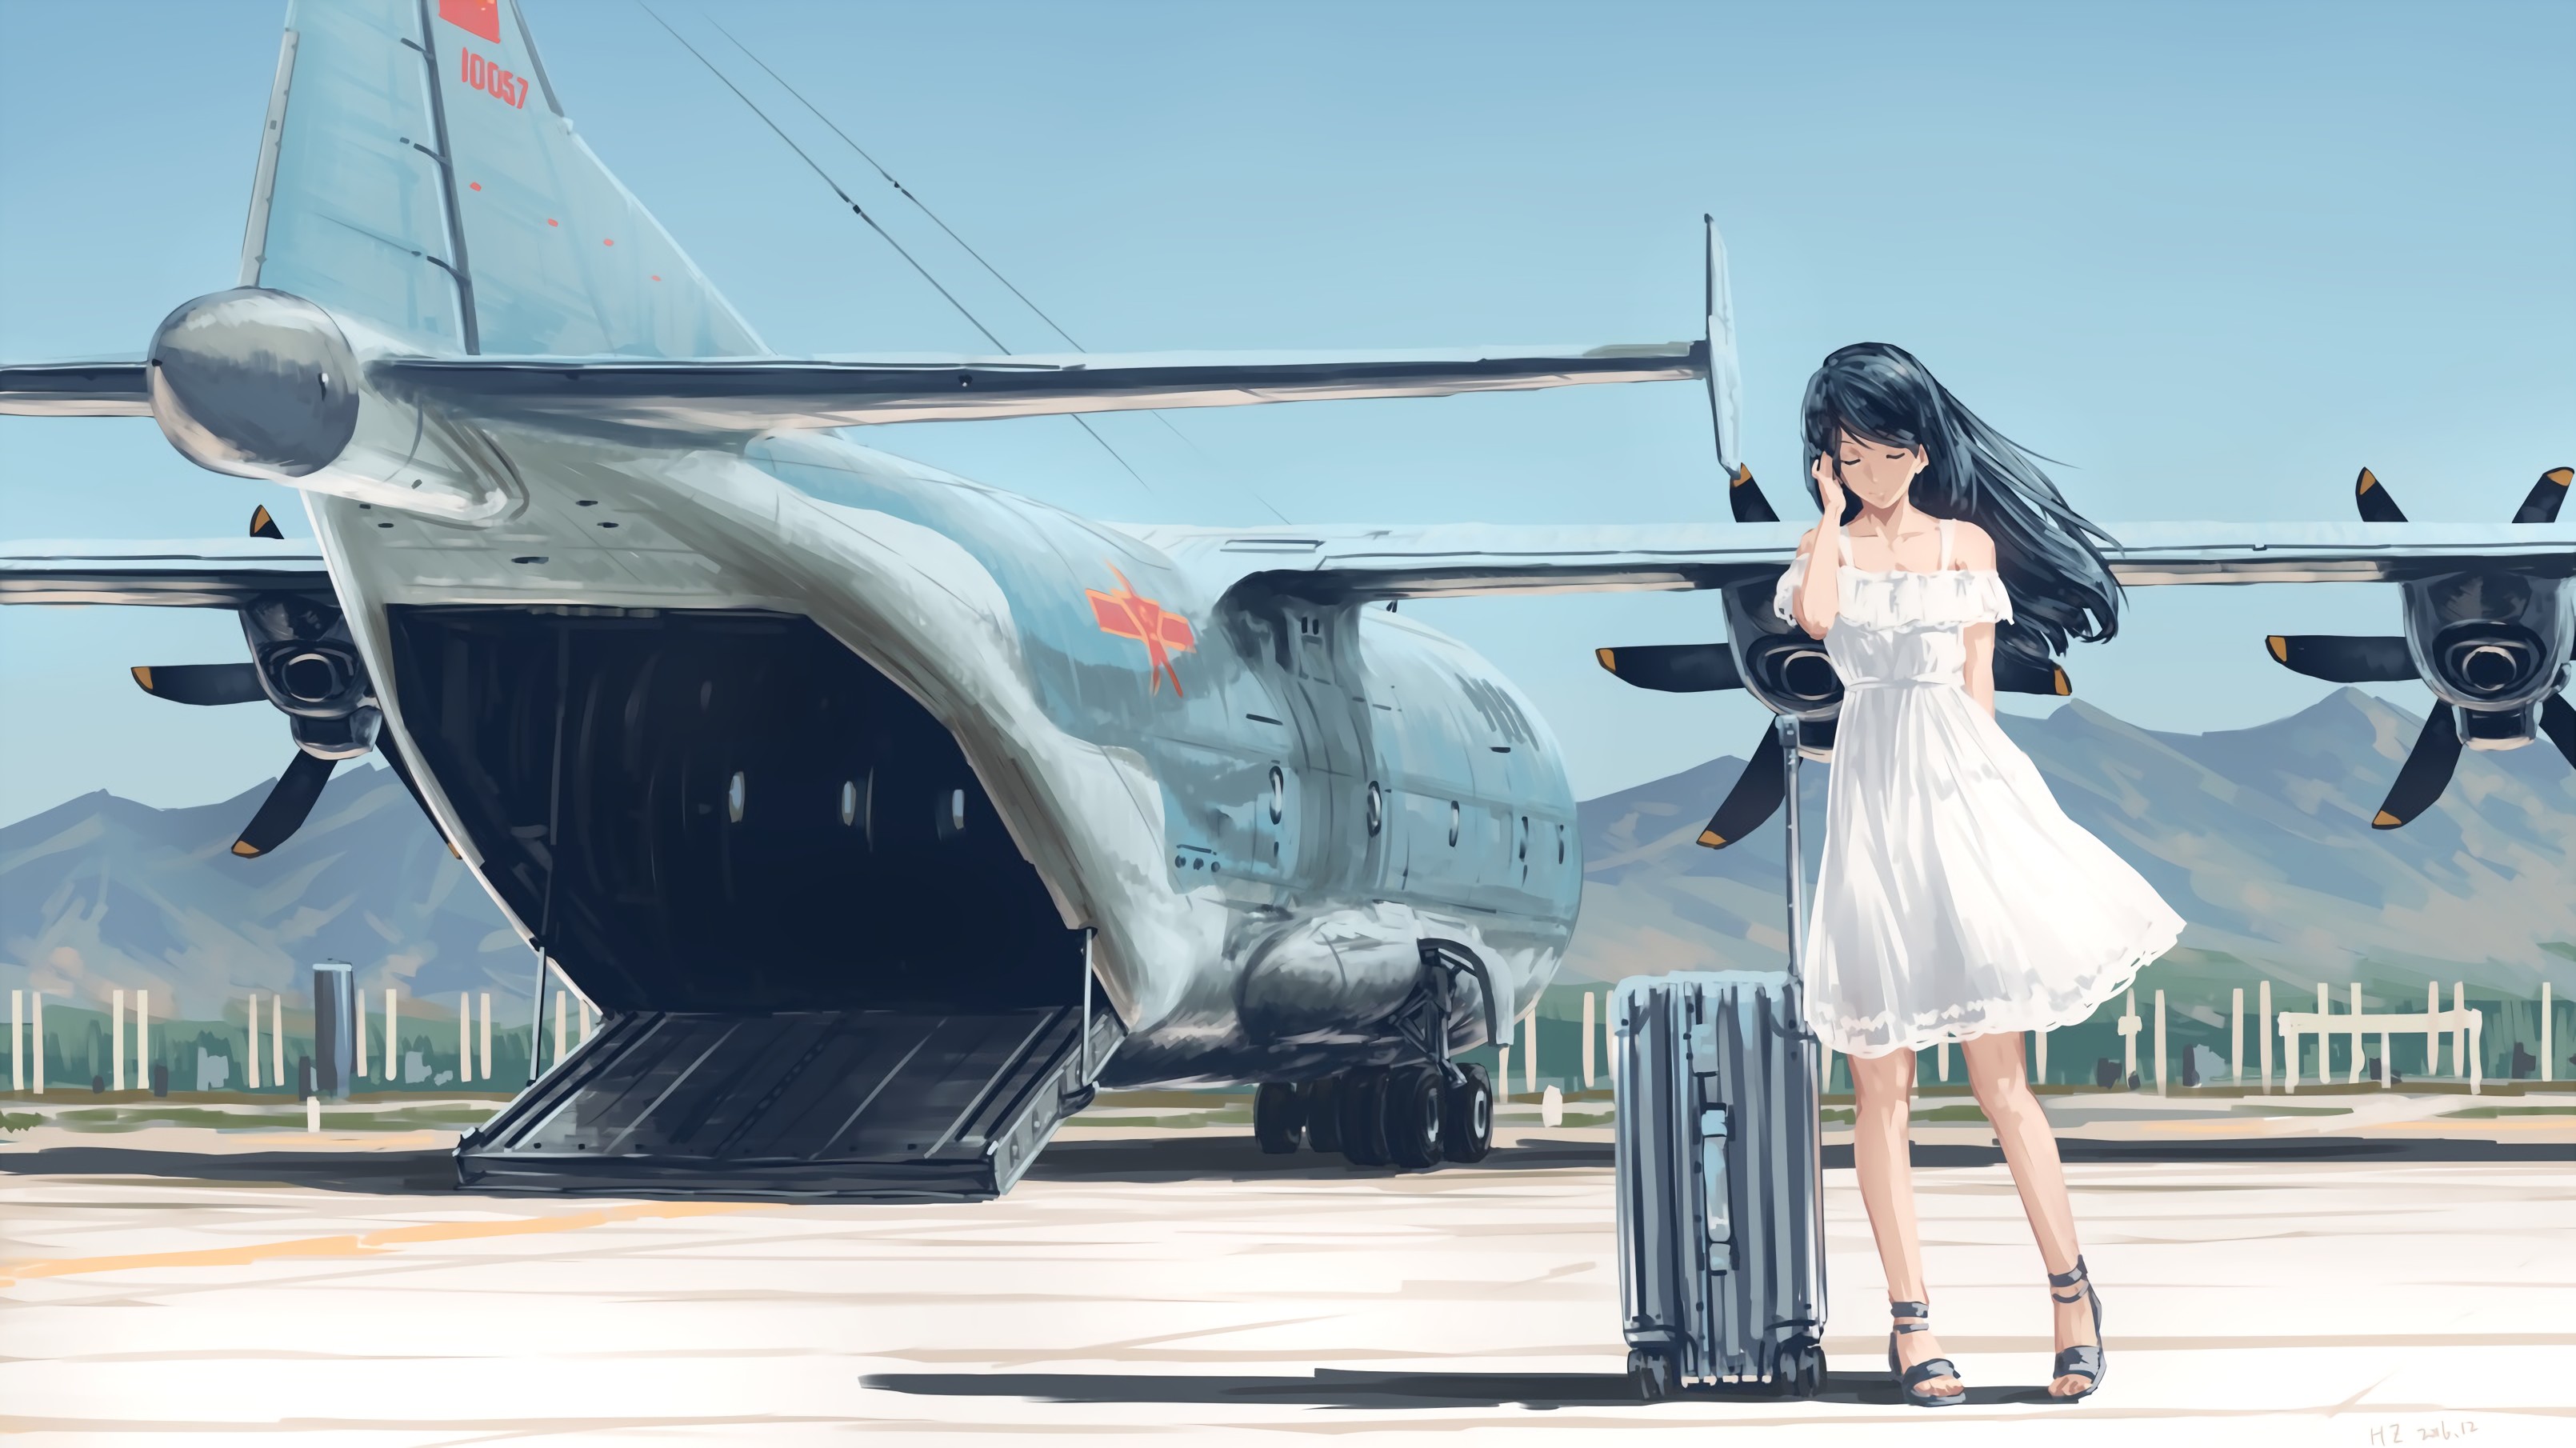 Download Anime Dog Airplane Ruins Wallpaper | Wallpapers.com